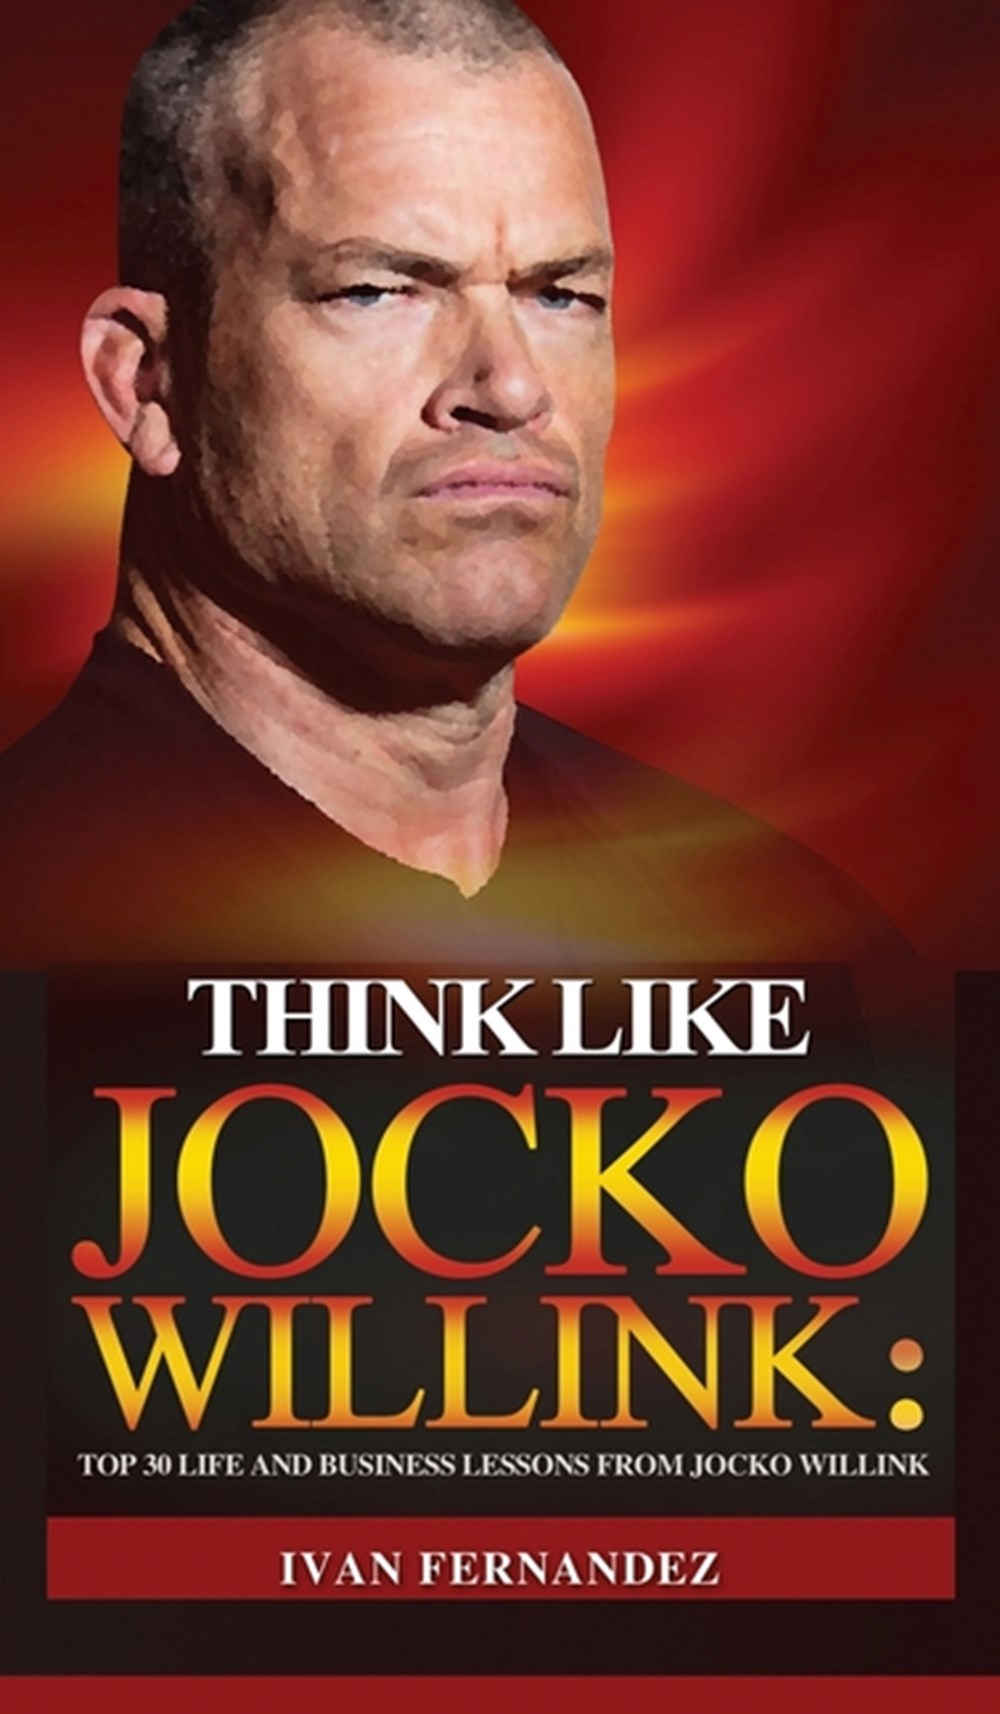 Think Like Jocko Willink Top 30 Life and Business Lessons from Jocko Willink